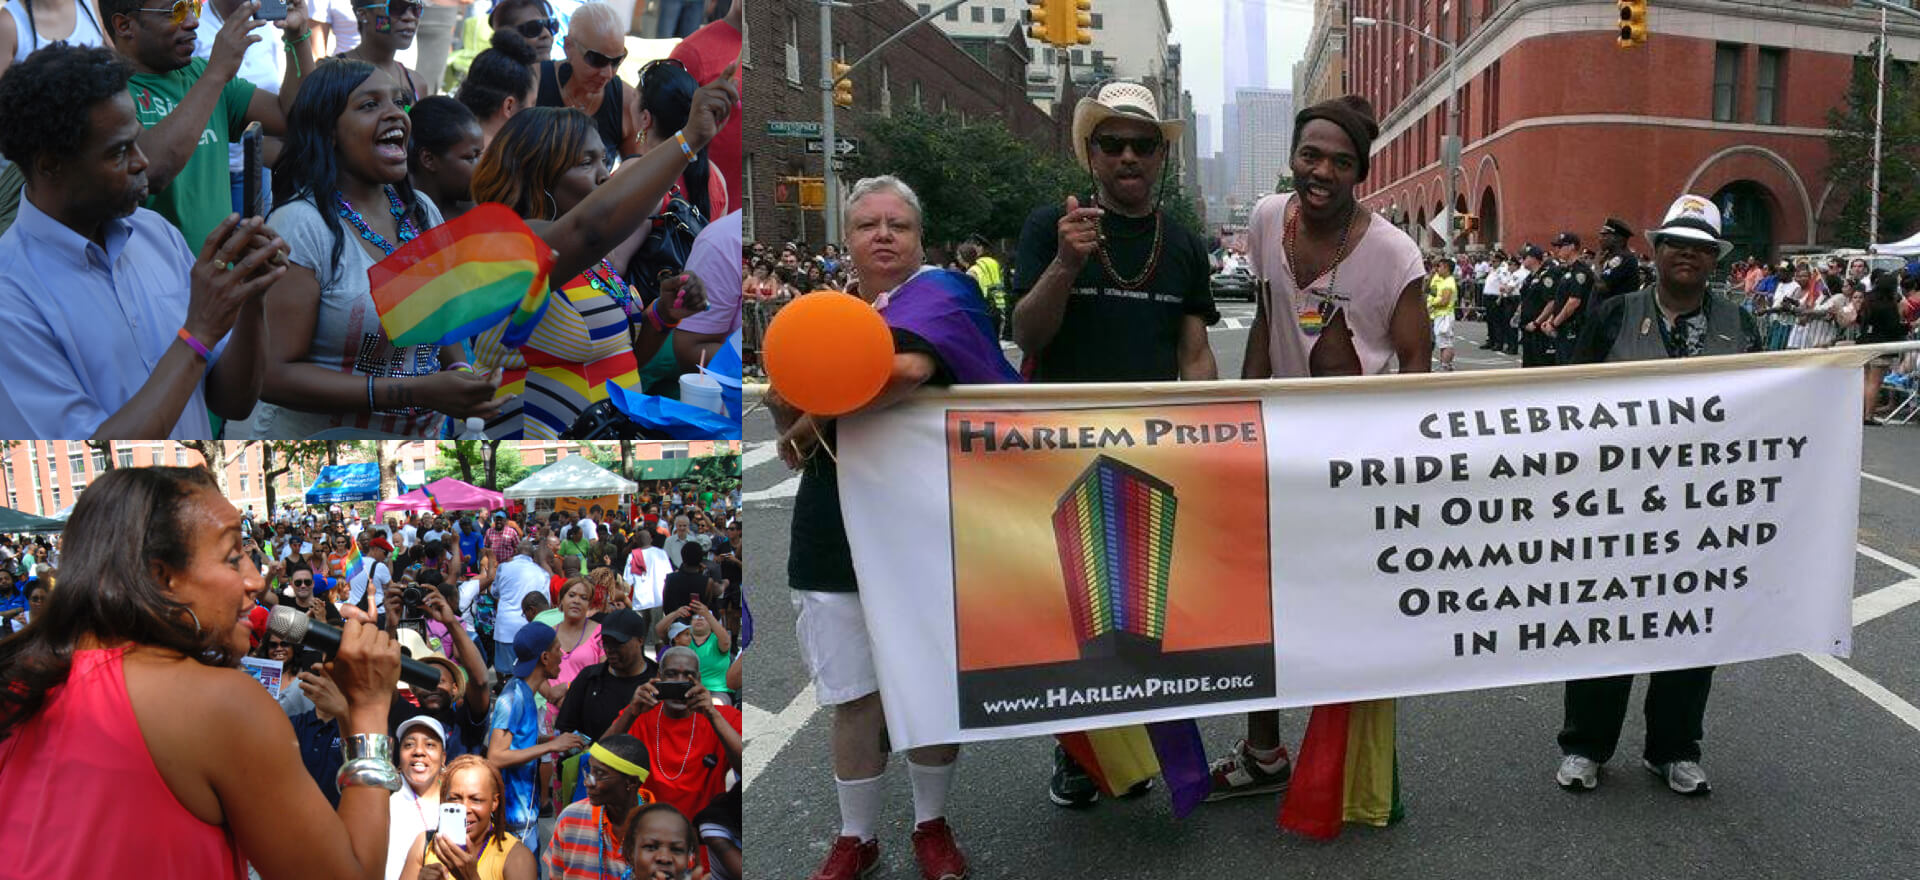 Celebrating Pride and Diversity parade pictures